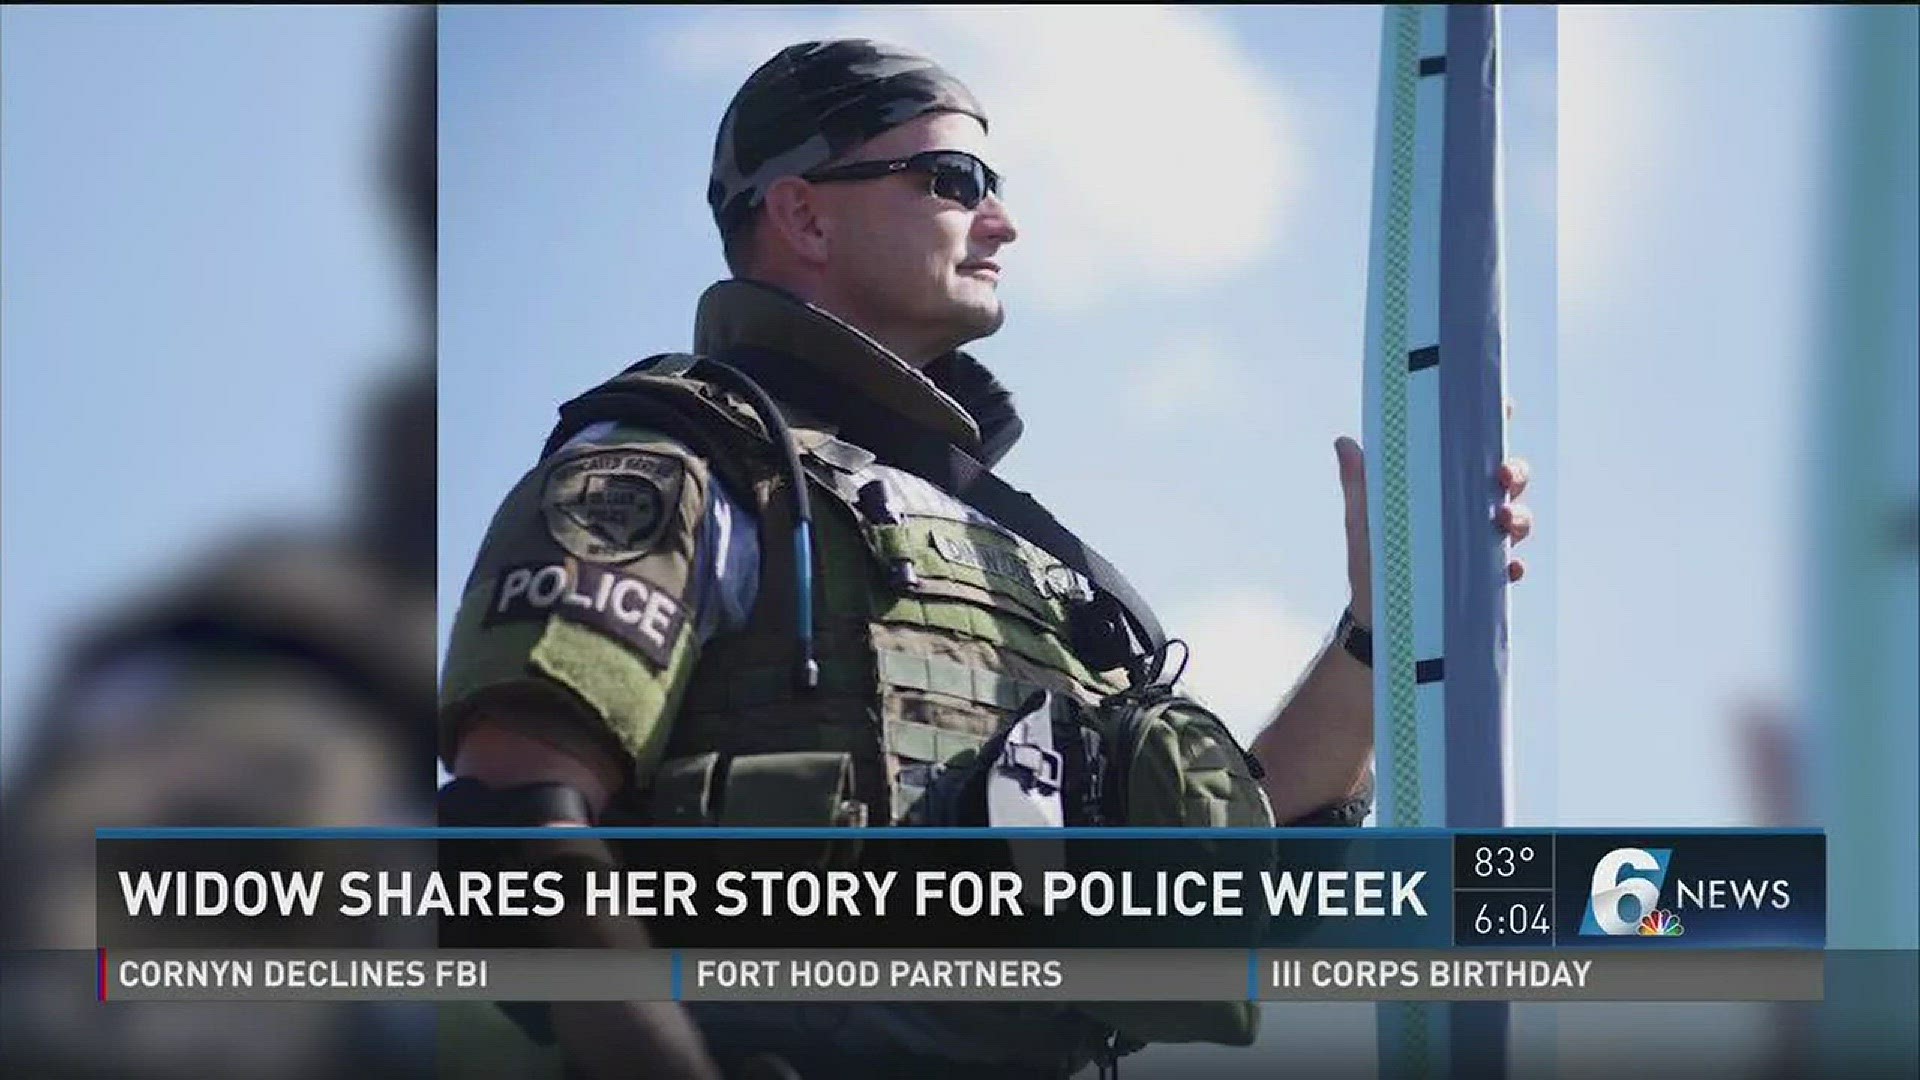 Widow shares her story for police week